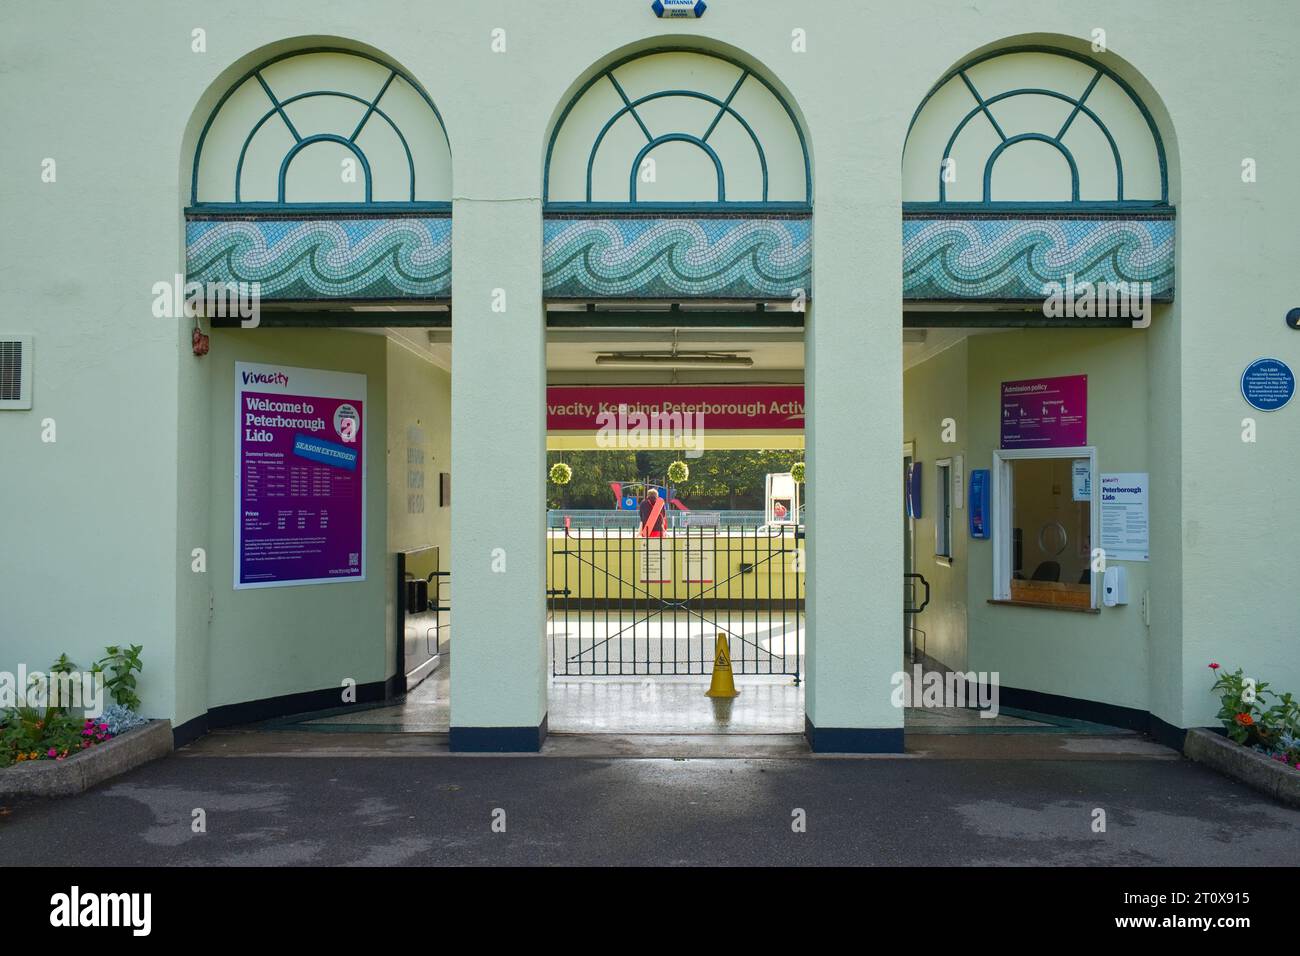 Entrance to the hacienda-style outdoor lido swimming pool at Peterborough Stock Photo